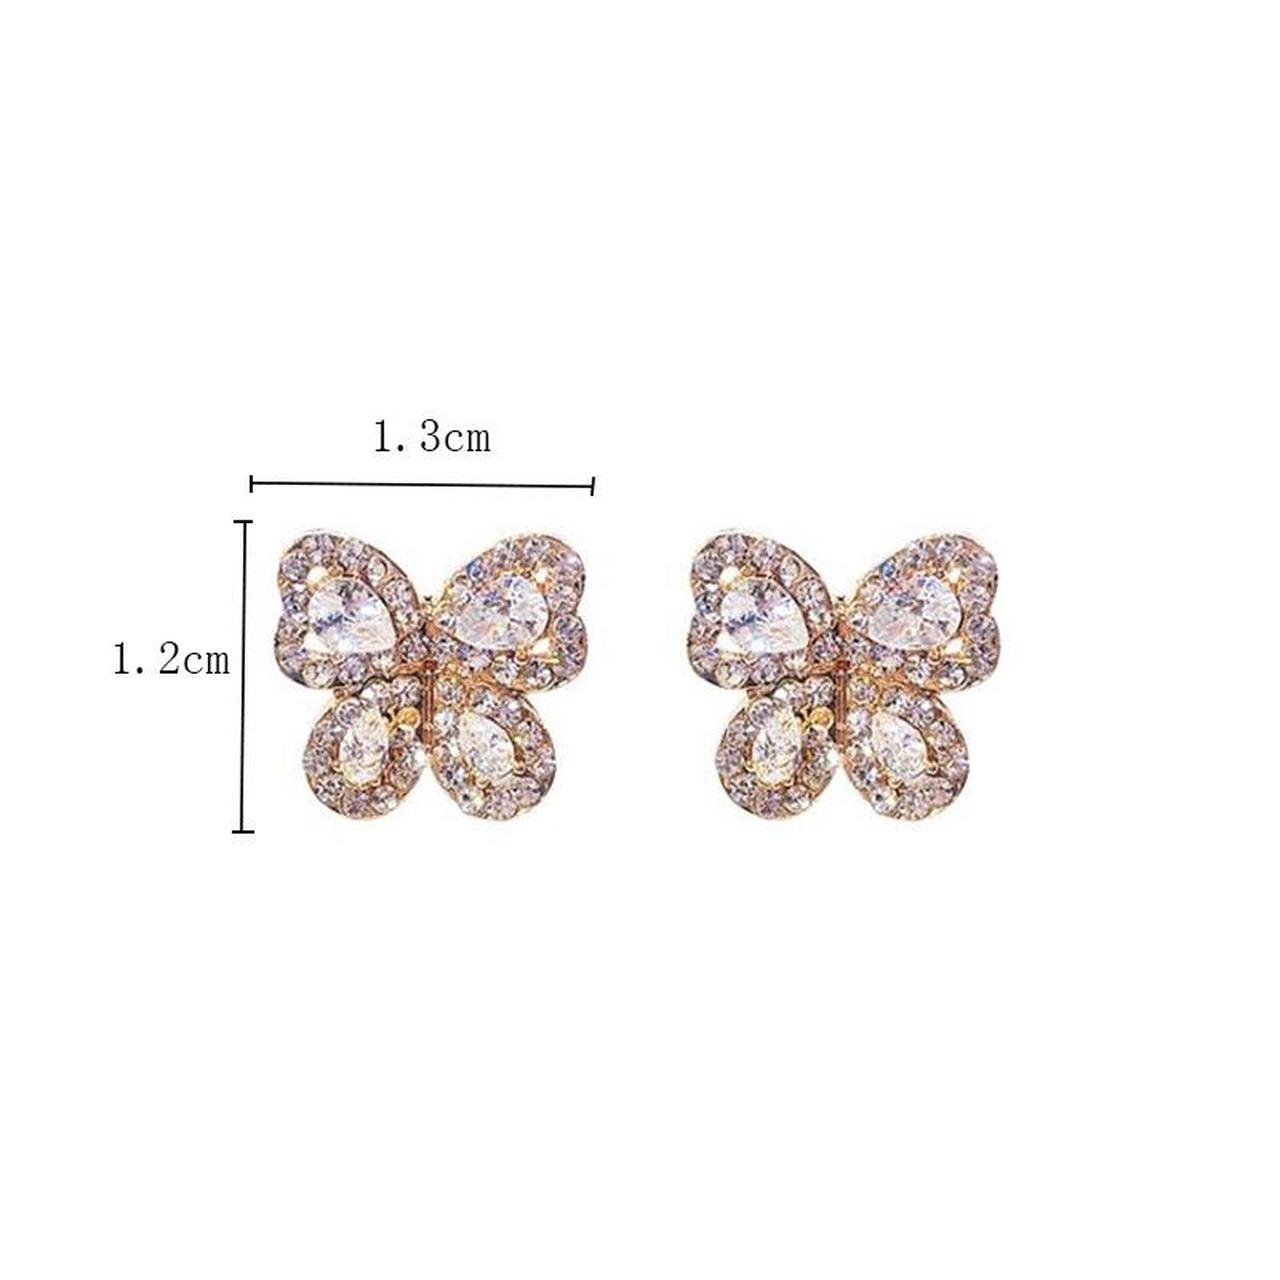 Product Image 2 - Silver Butterfly Sparkly Earrings

So pretty